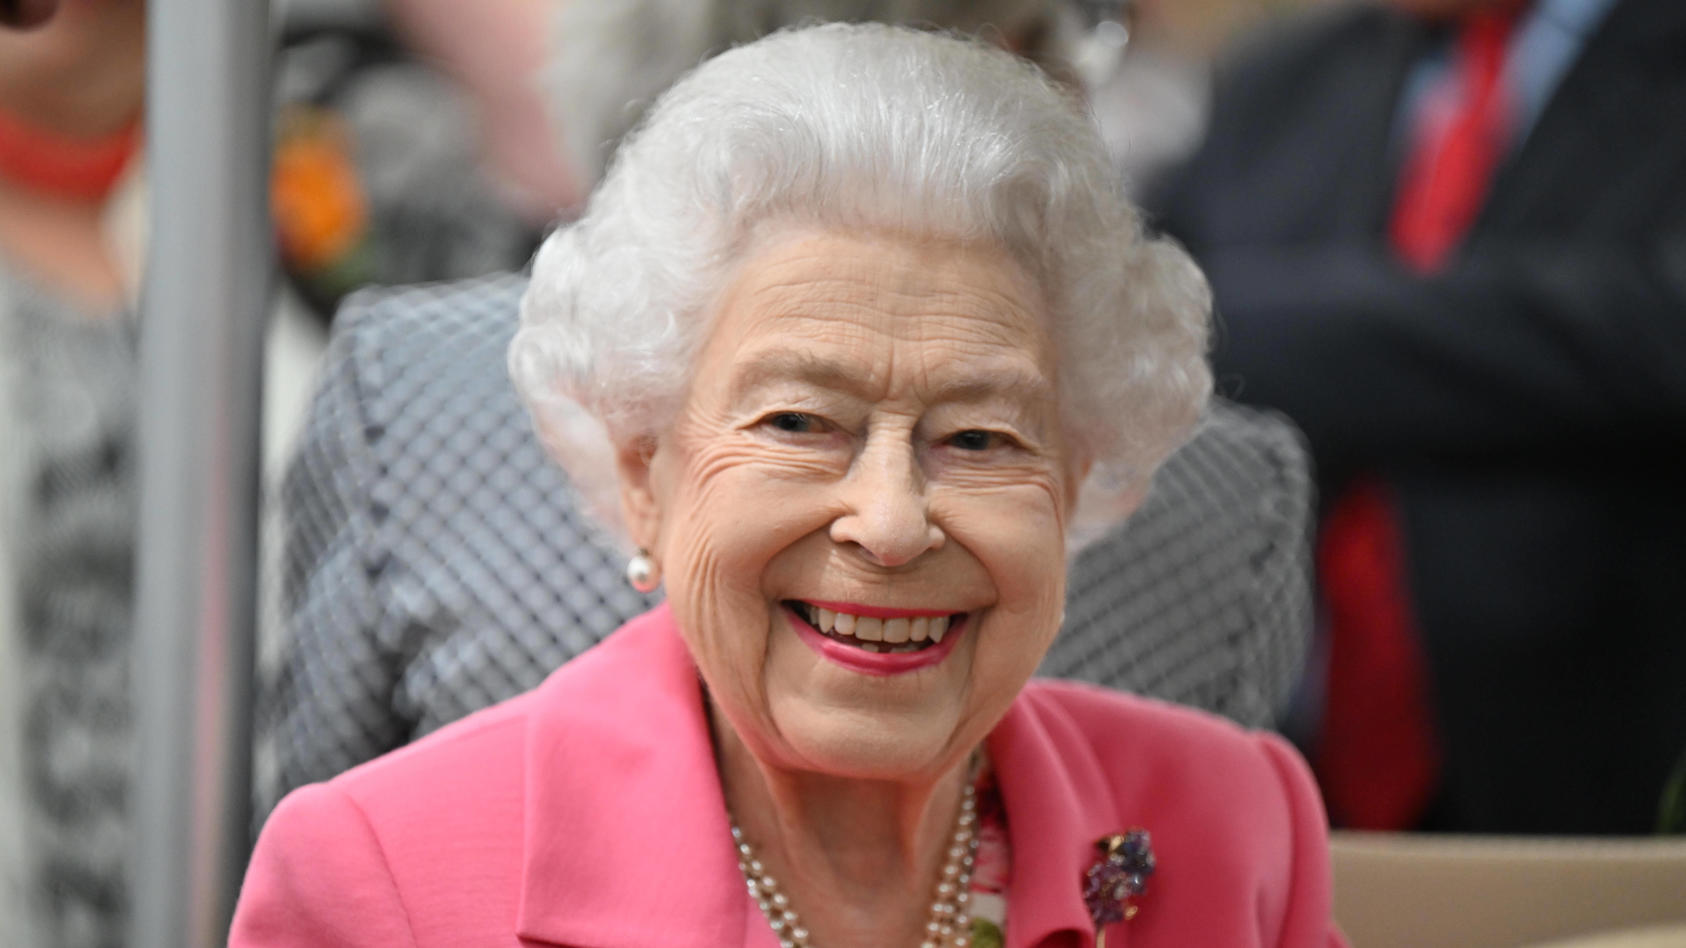 . 23/05/2022. London, United Kingdom. Queen Elizabeth II uses a mobility buggy during a visit to the Chelsea Flower Show in London. PUBLICATIONxINxGERxSUIxAUTxHUNxONLY xPoolx/xi-Imagesx IIM-23443-0027 